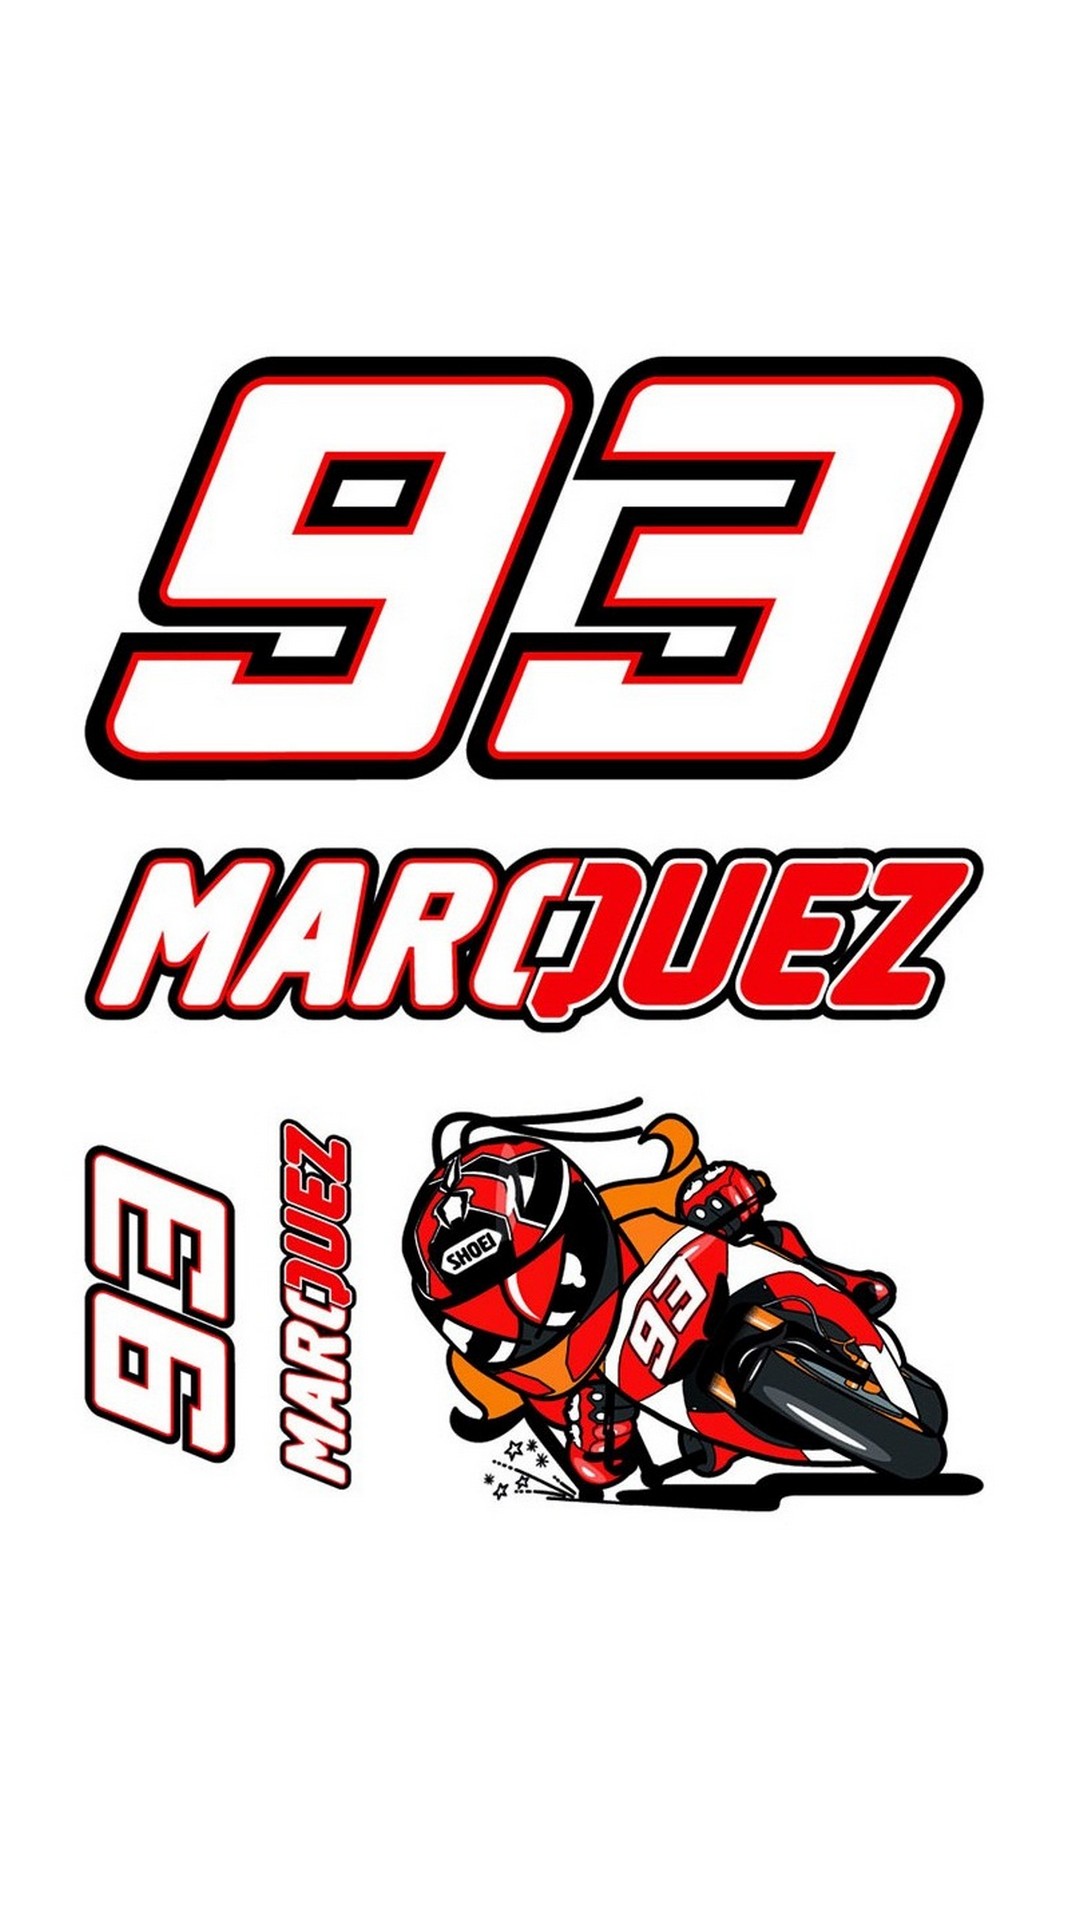 Marc Marquez Wallpaper For iPhone resolution 1080x1920